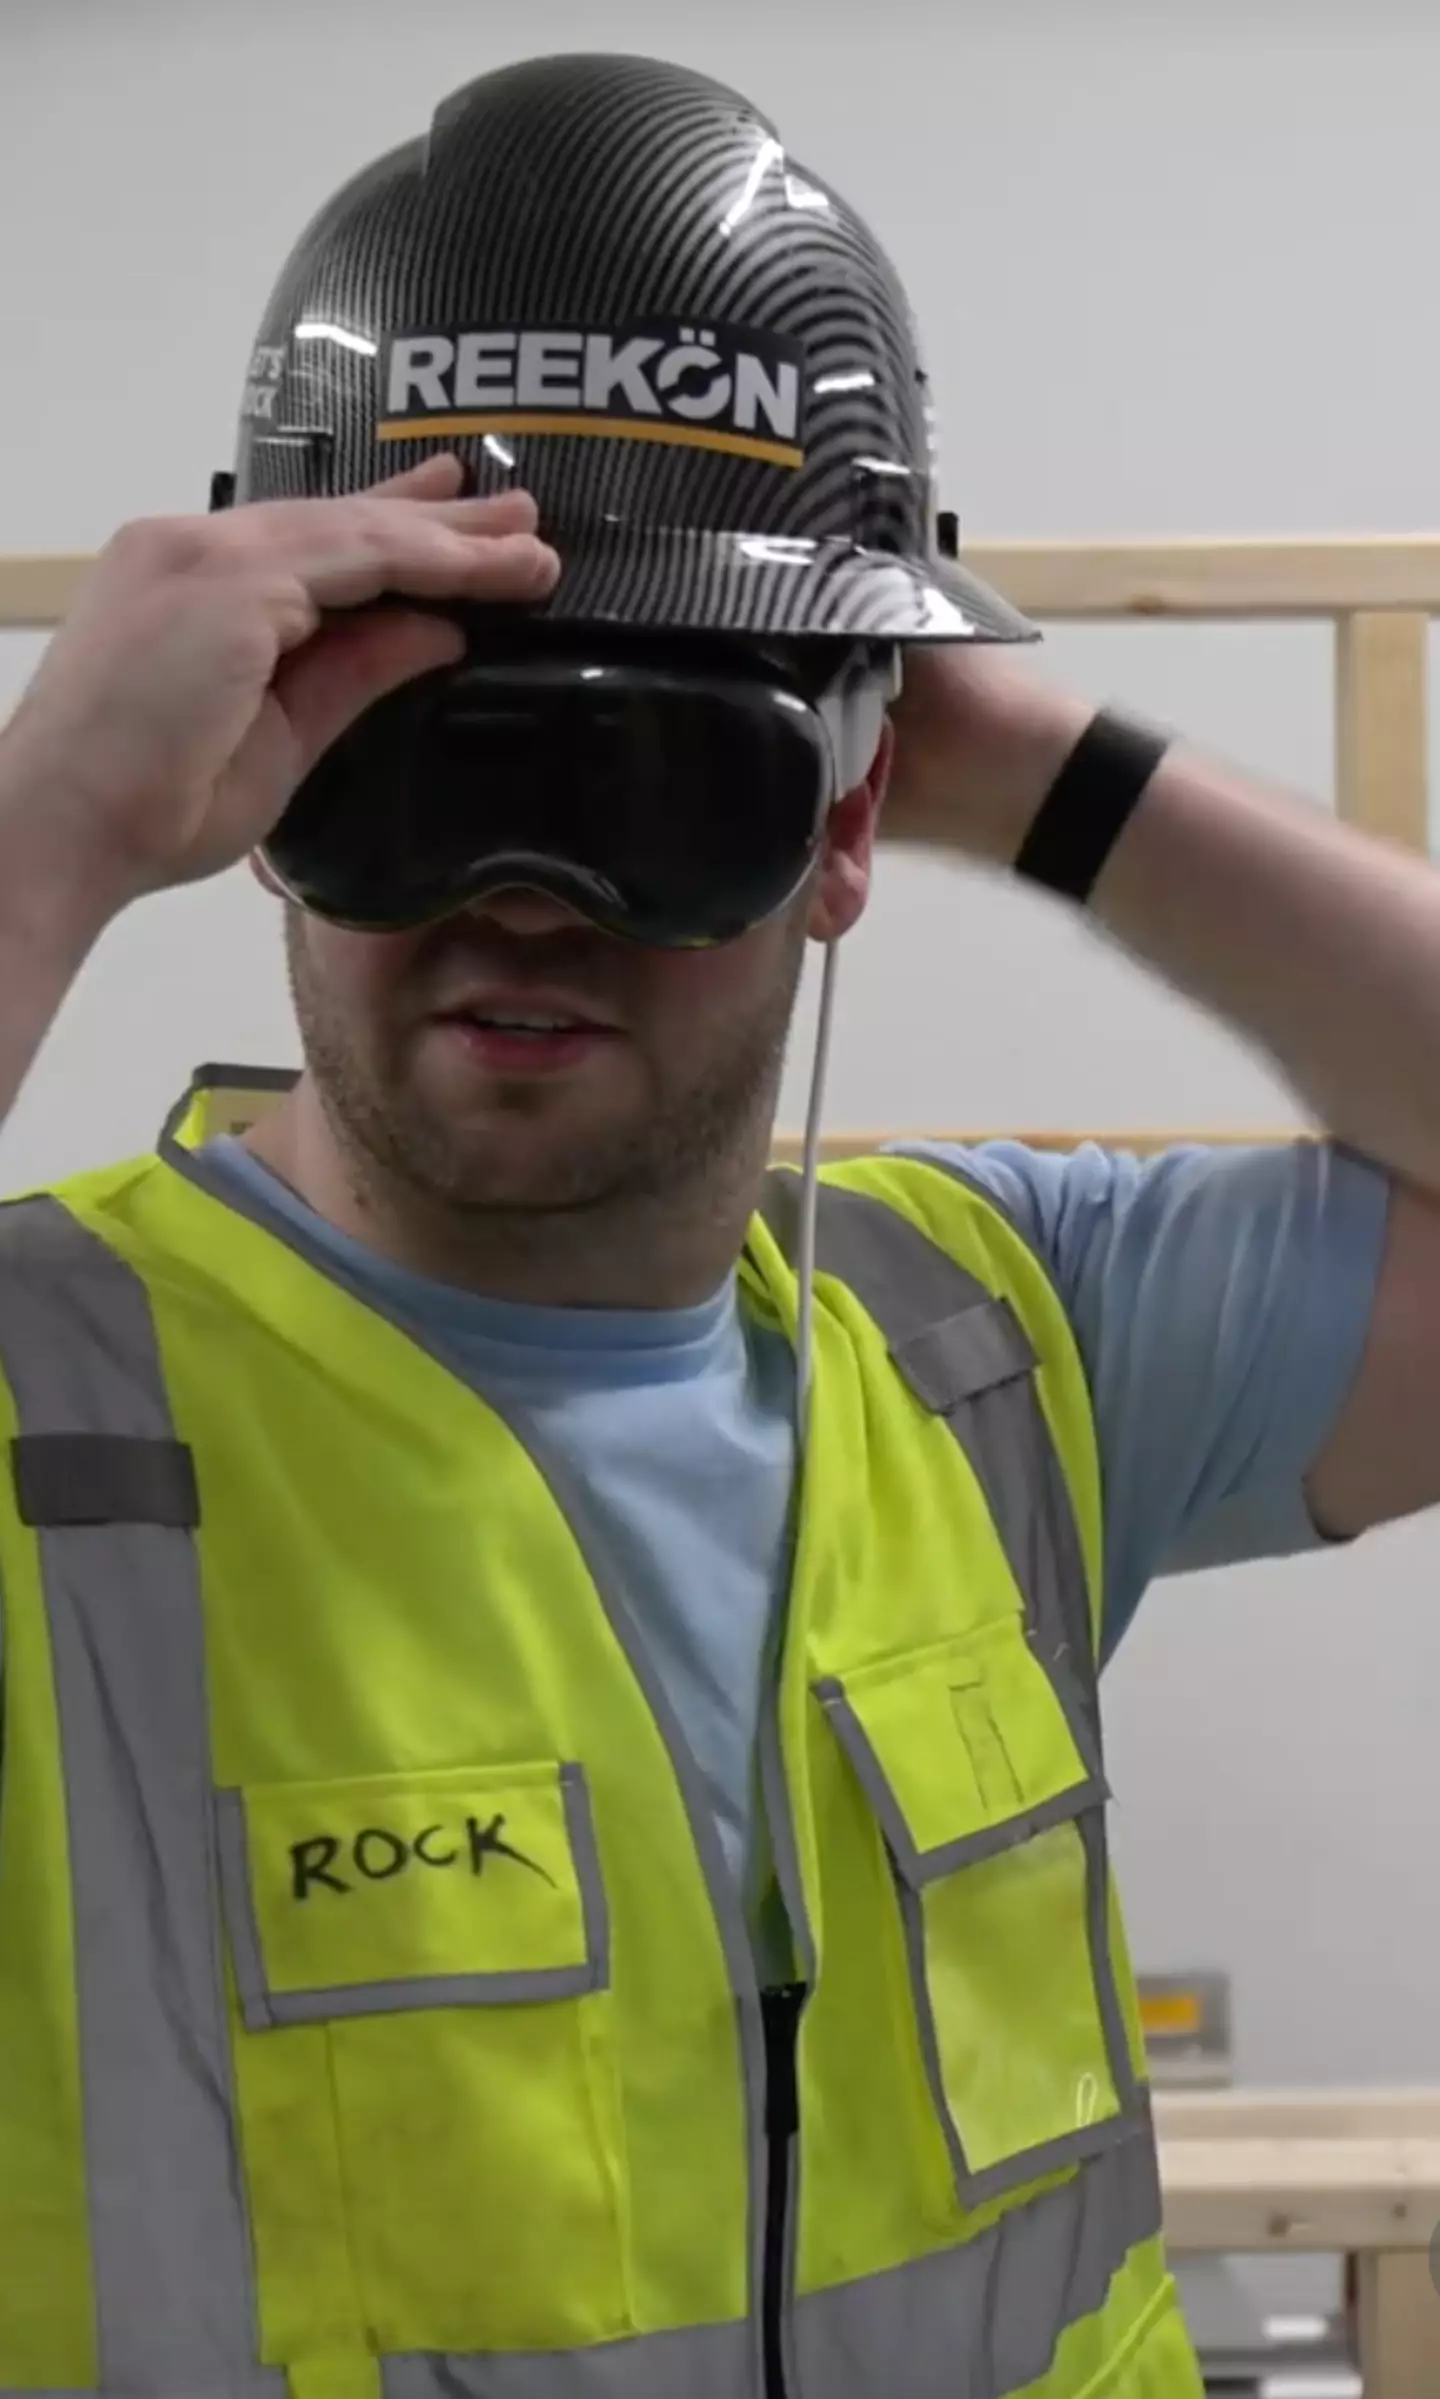 A builder showed how his company is utilising the Apple Vision Pro headset.